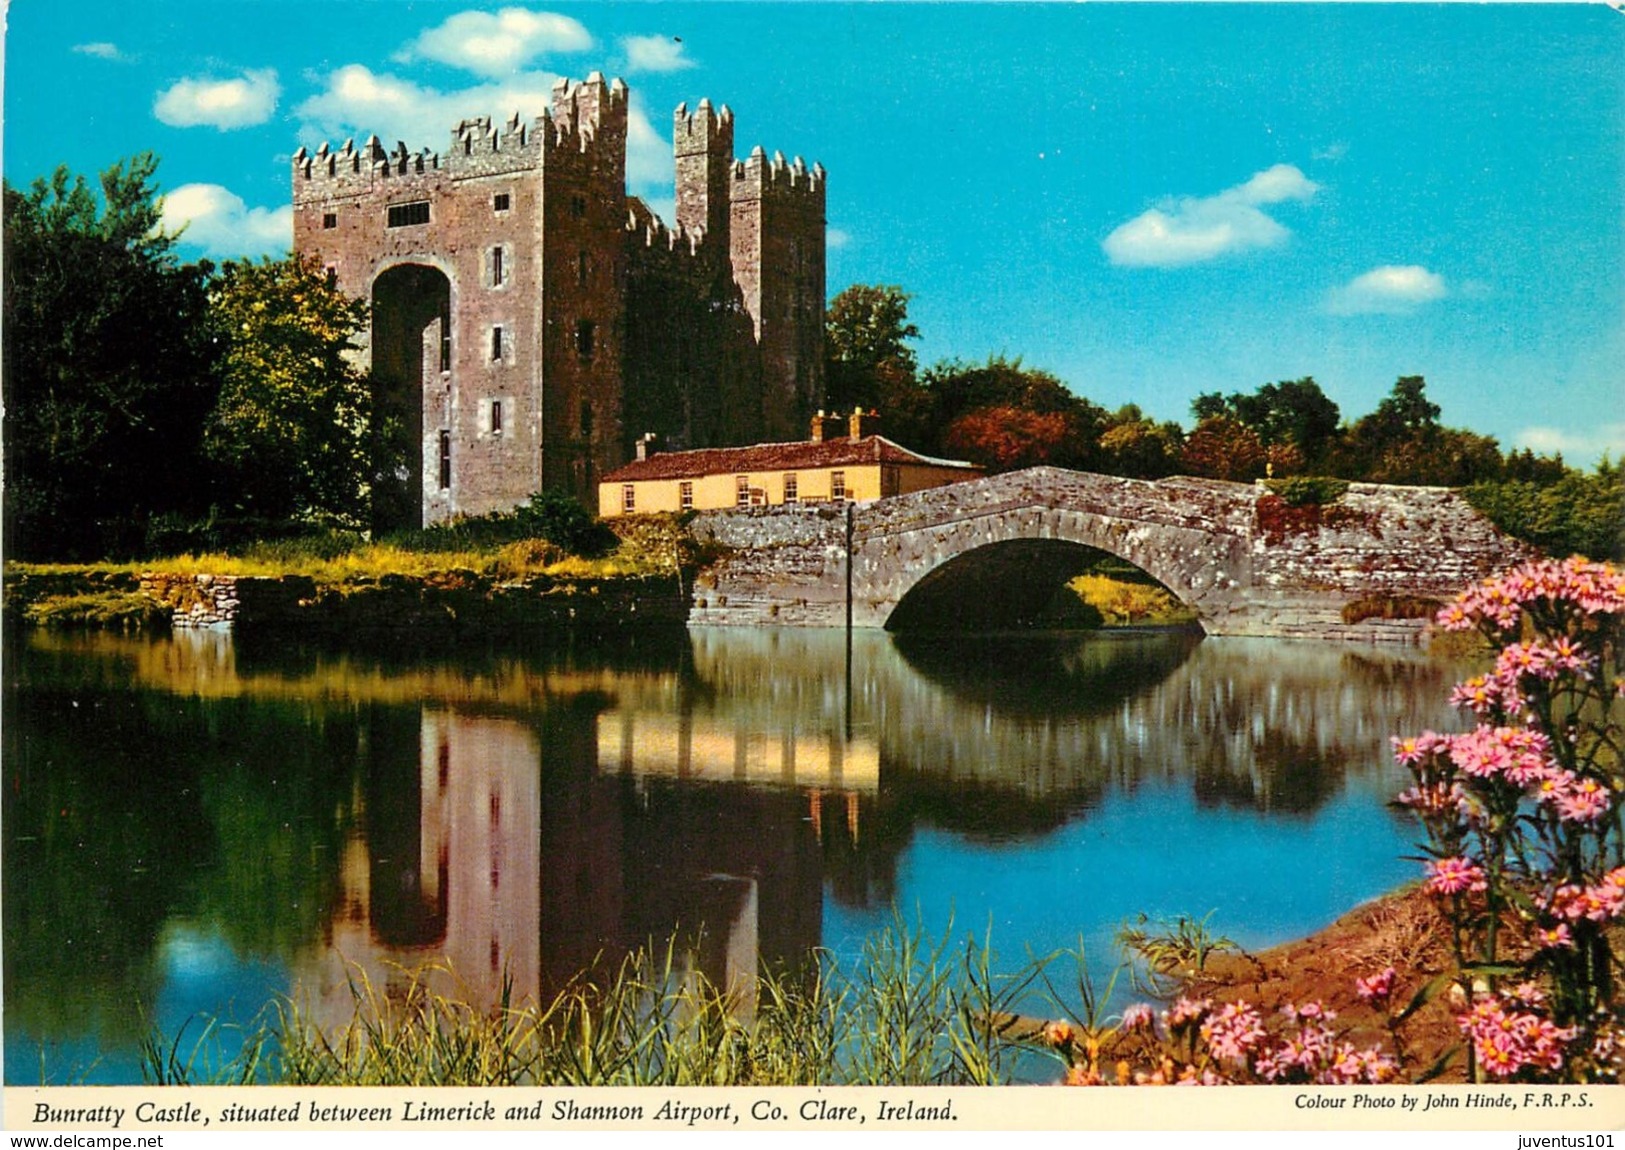 CPSM Ireland-Bunratty Castle,situated Bette En Limerick And Shannon Airport-Clare            L2397 - Clare